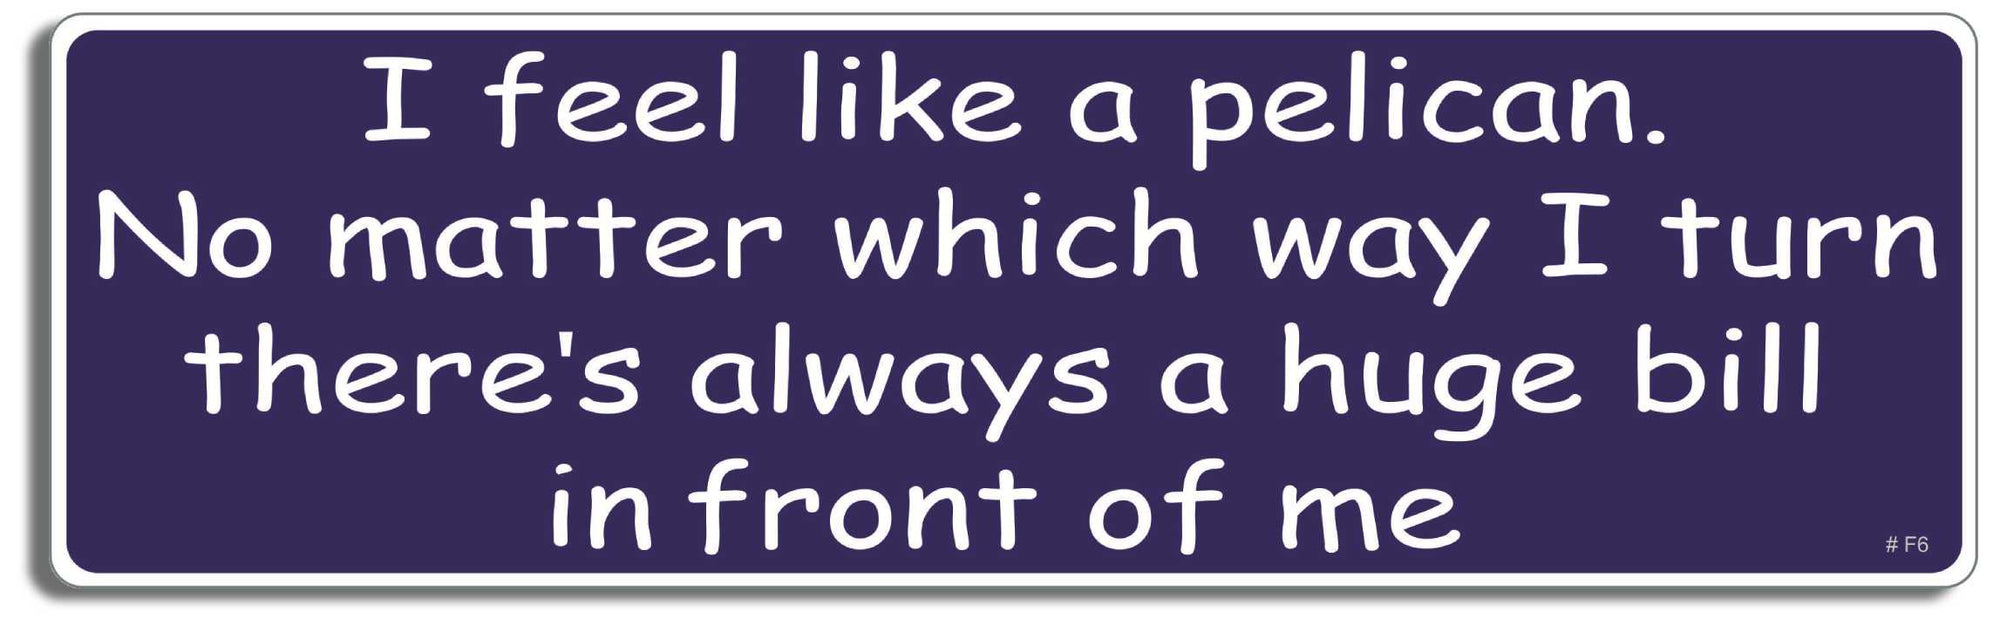 I feel like a pelican - 3" x 10" Bumper Sticker--Car Magnet- -  Decal Bumper Sticker-funny Bumper Sticker Car Magnet I feel like a pelican-  Decal for cars funny, funny quote, funny saying